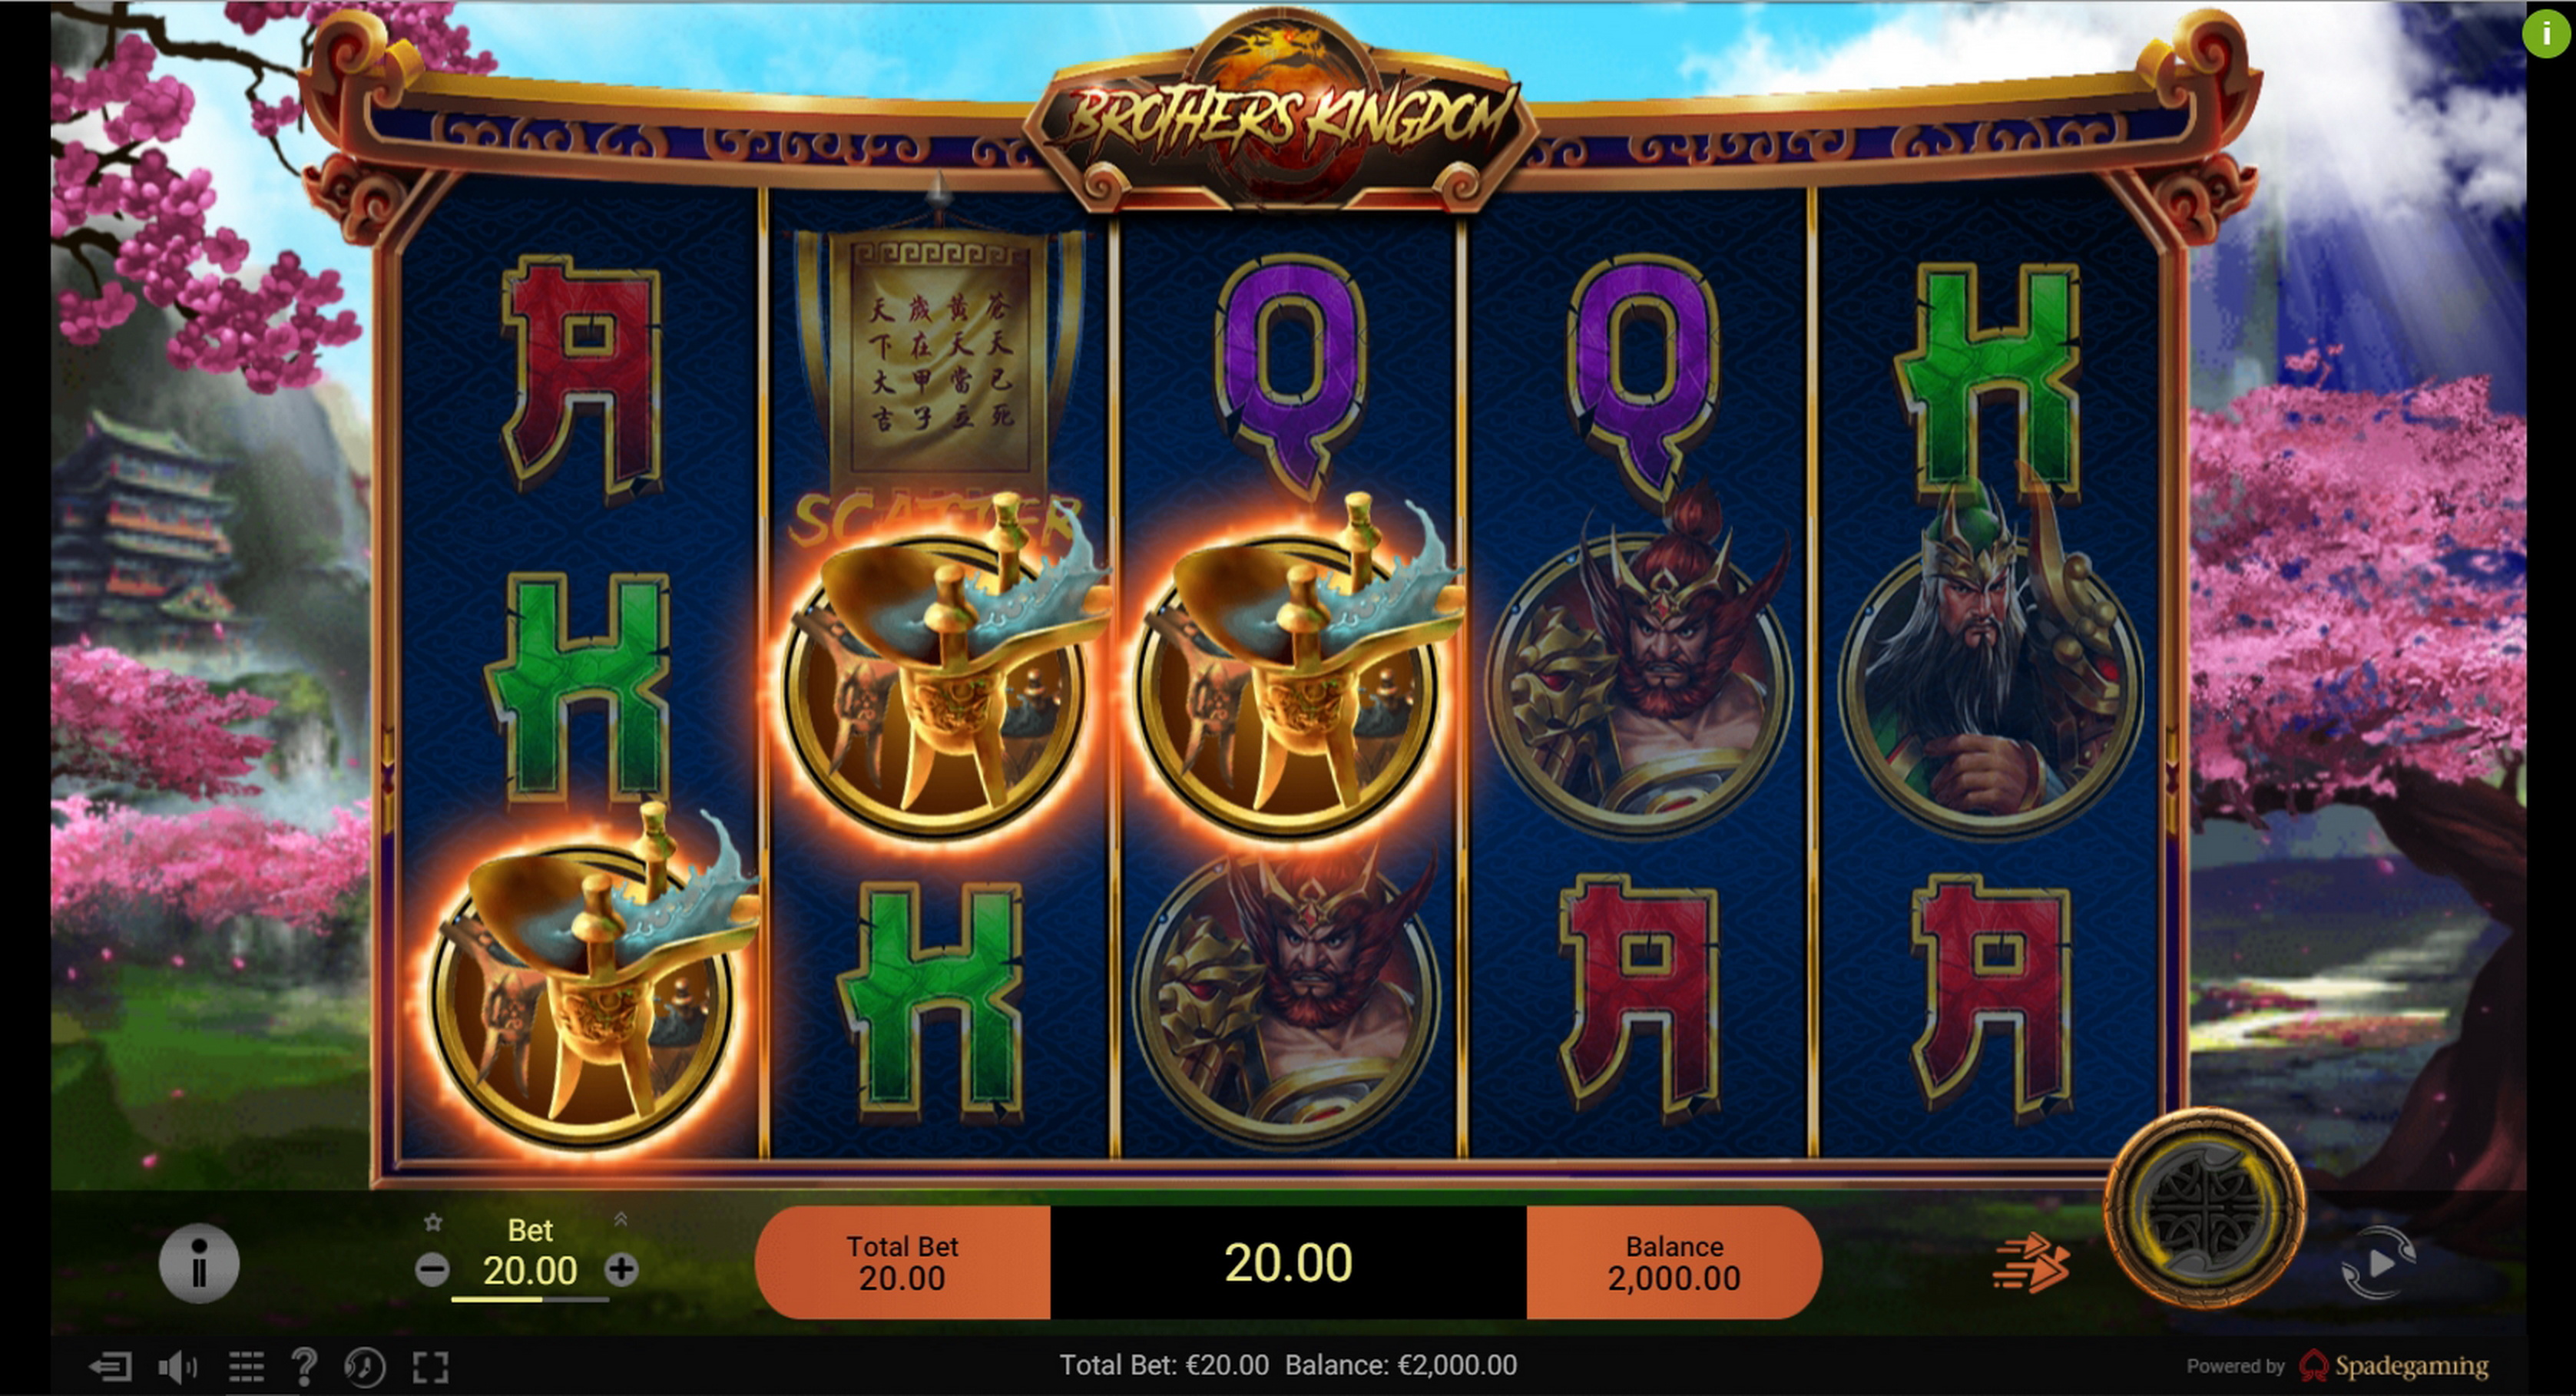 Win Money in Brothers Kingdom Free Slot Game by Spade Gaming